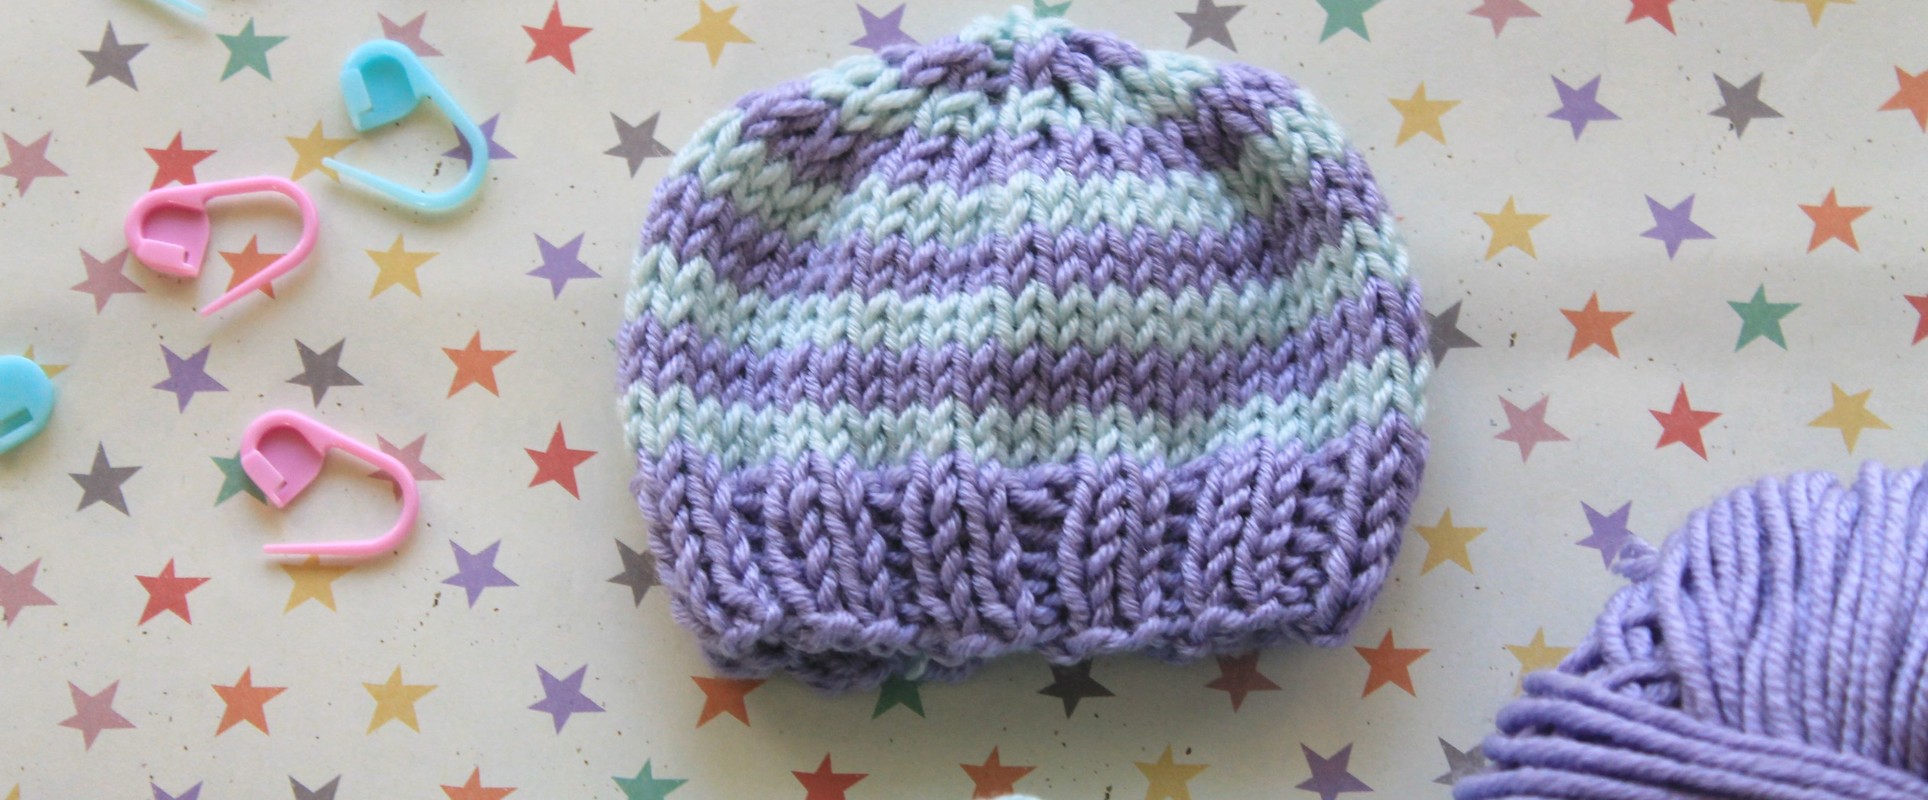 NEW HAND KNITTED BLUE HAT TO FIT A  PREMATURE   BABY WITH FREE UK POSTAGE 